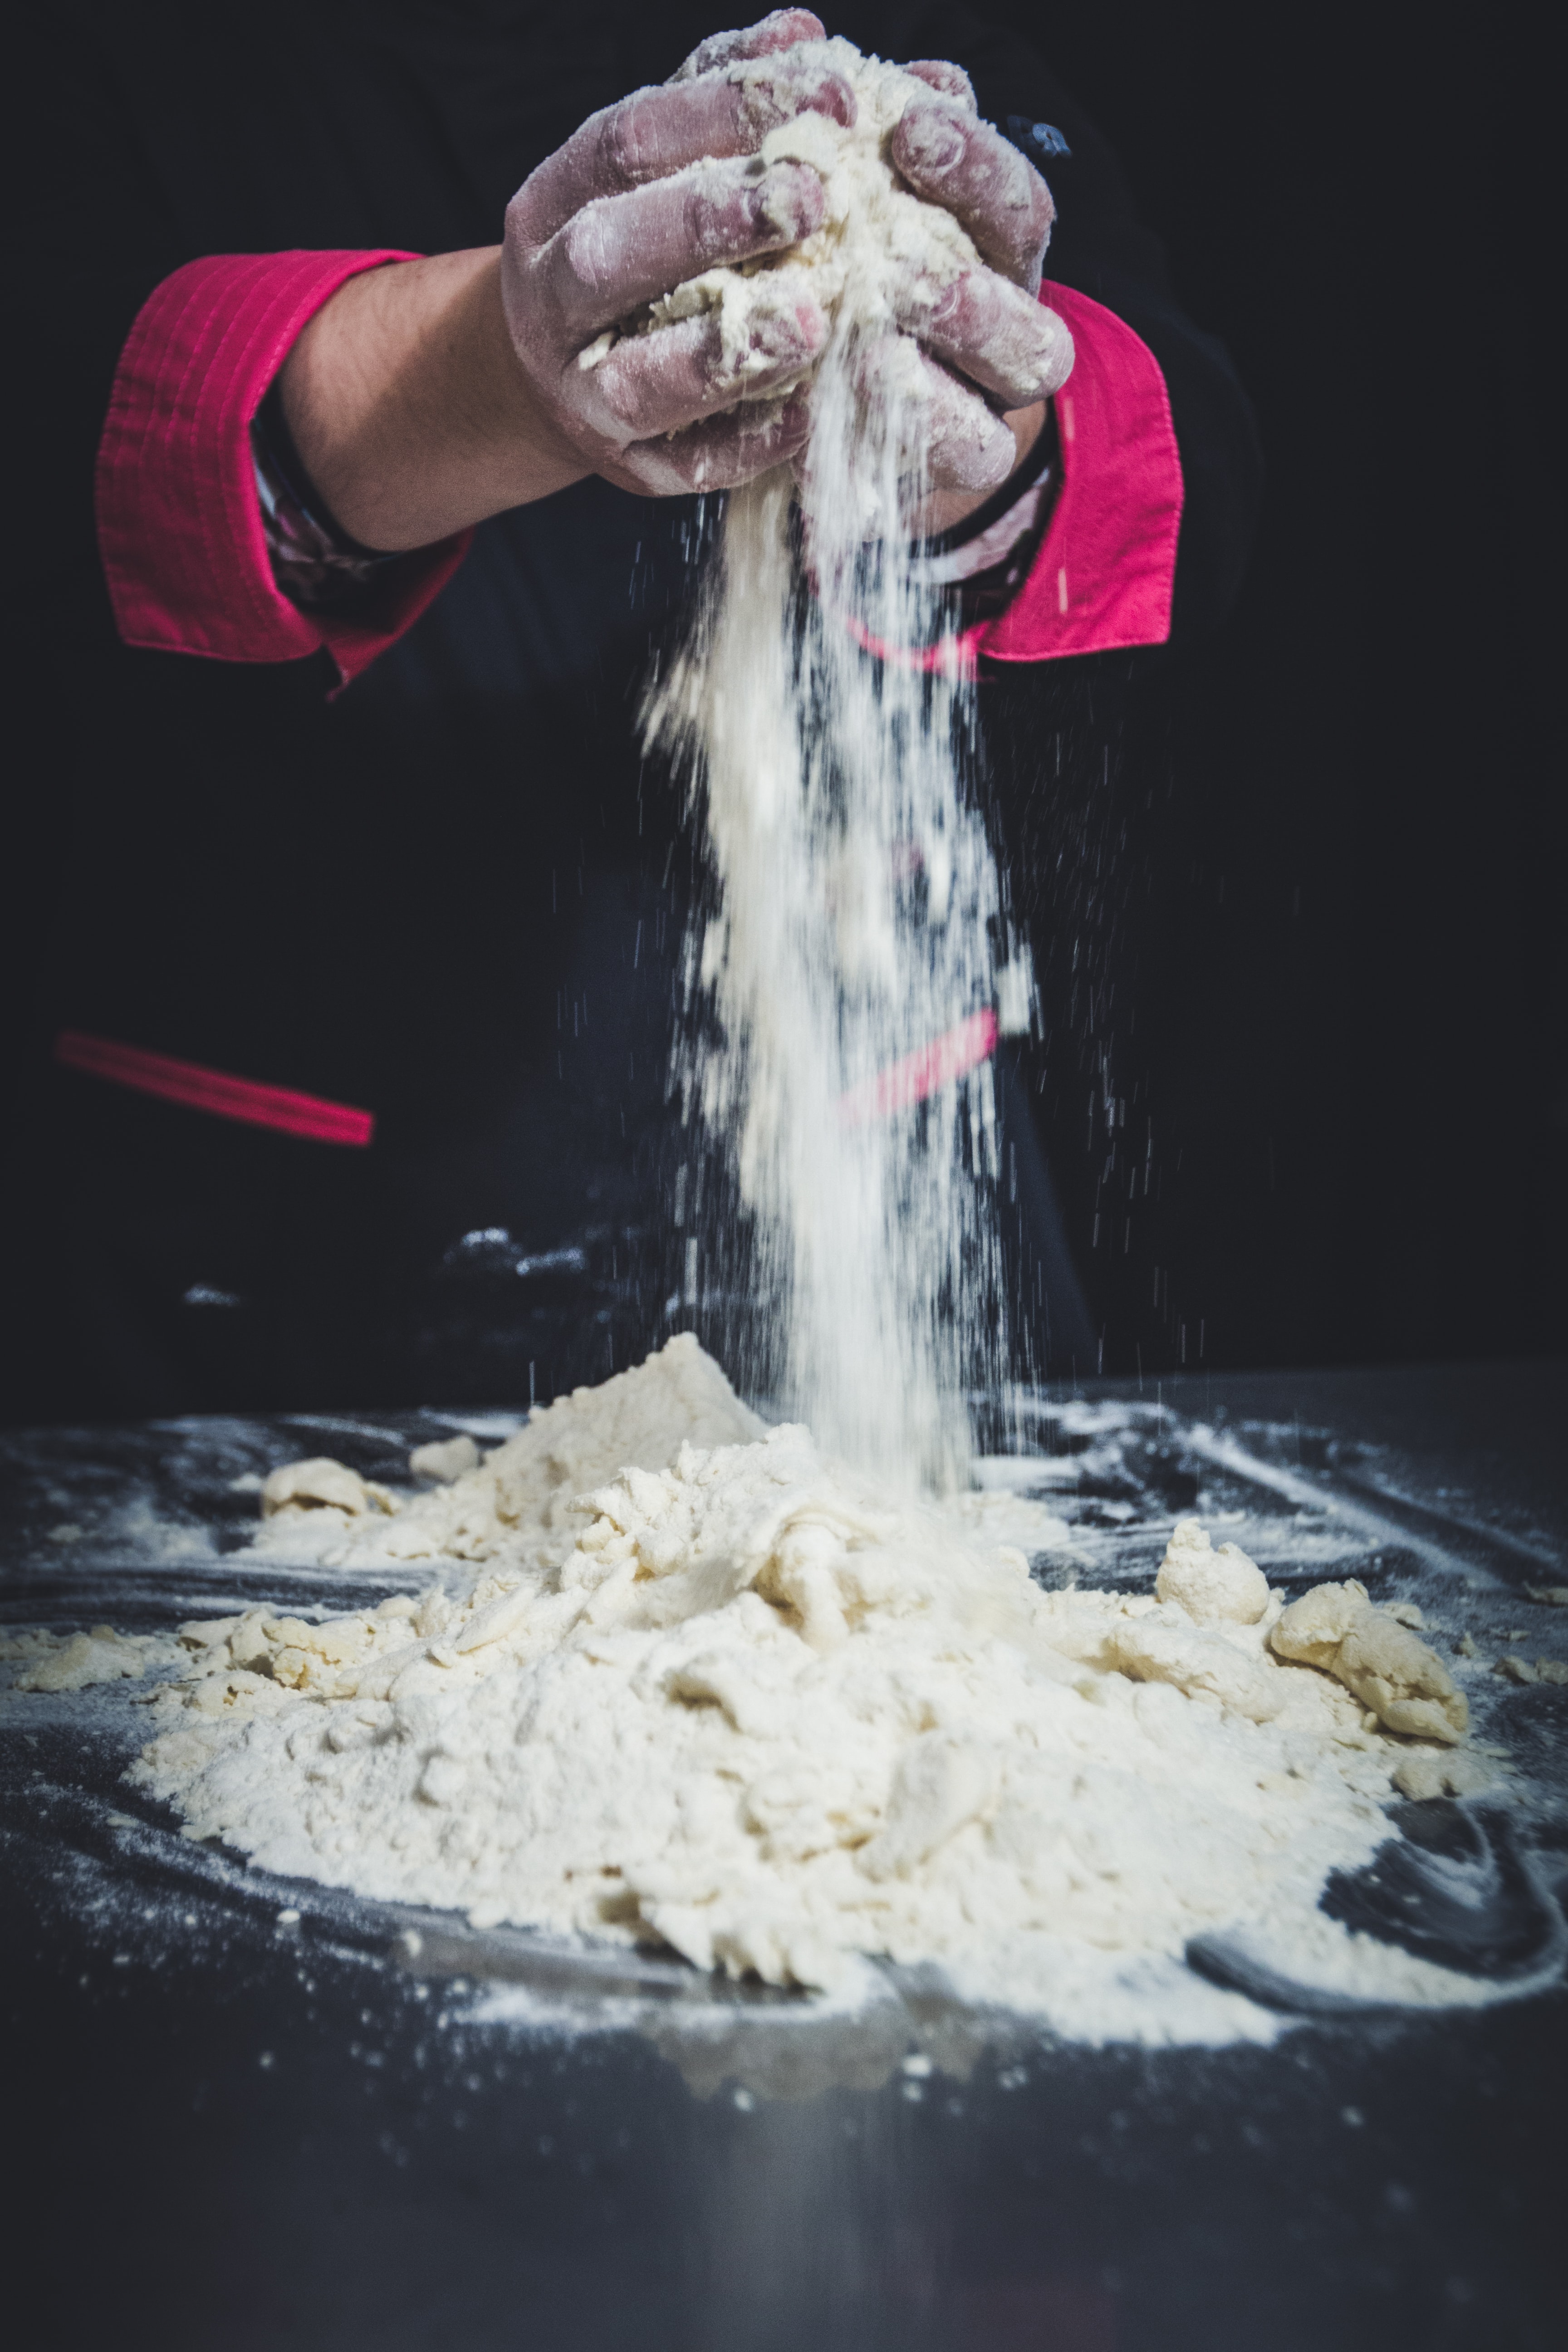 Hands with flour